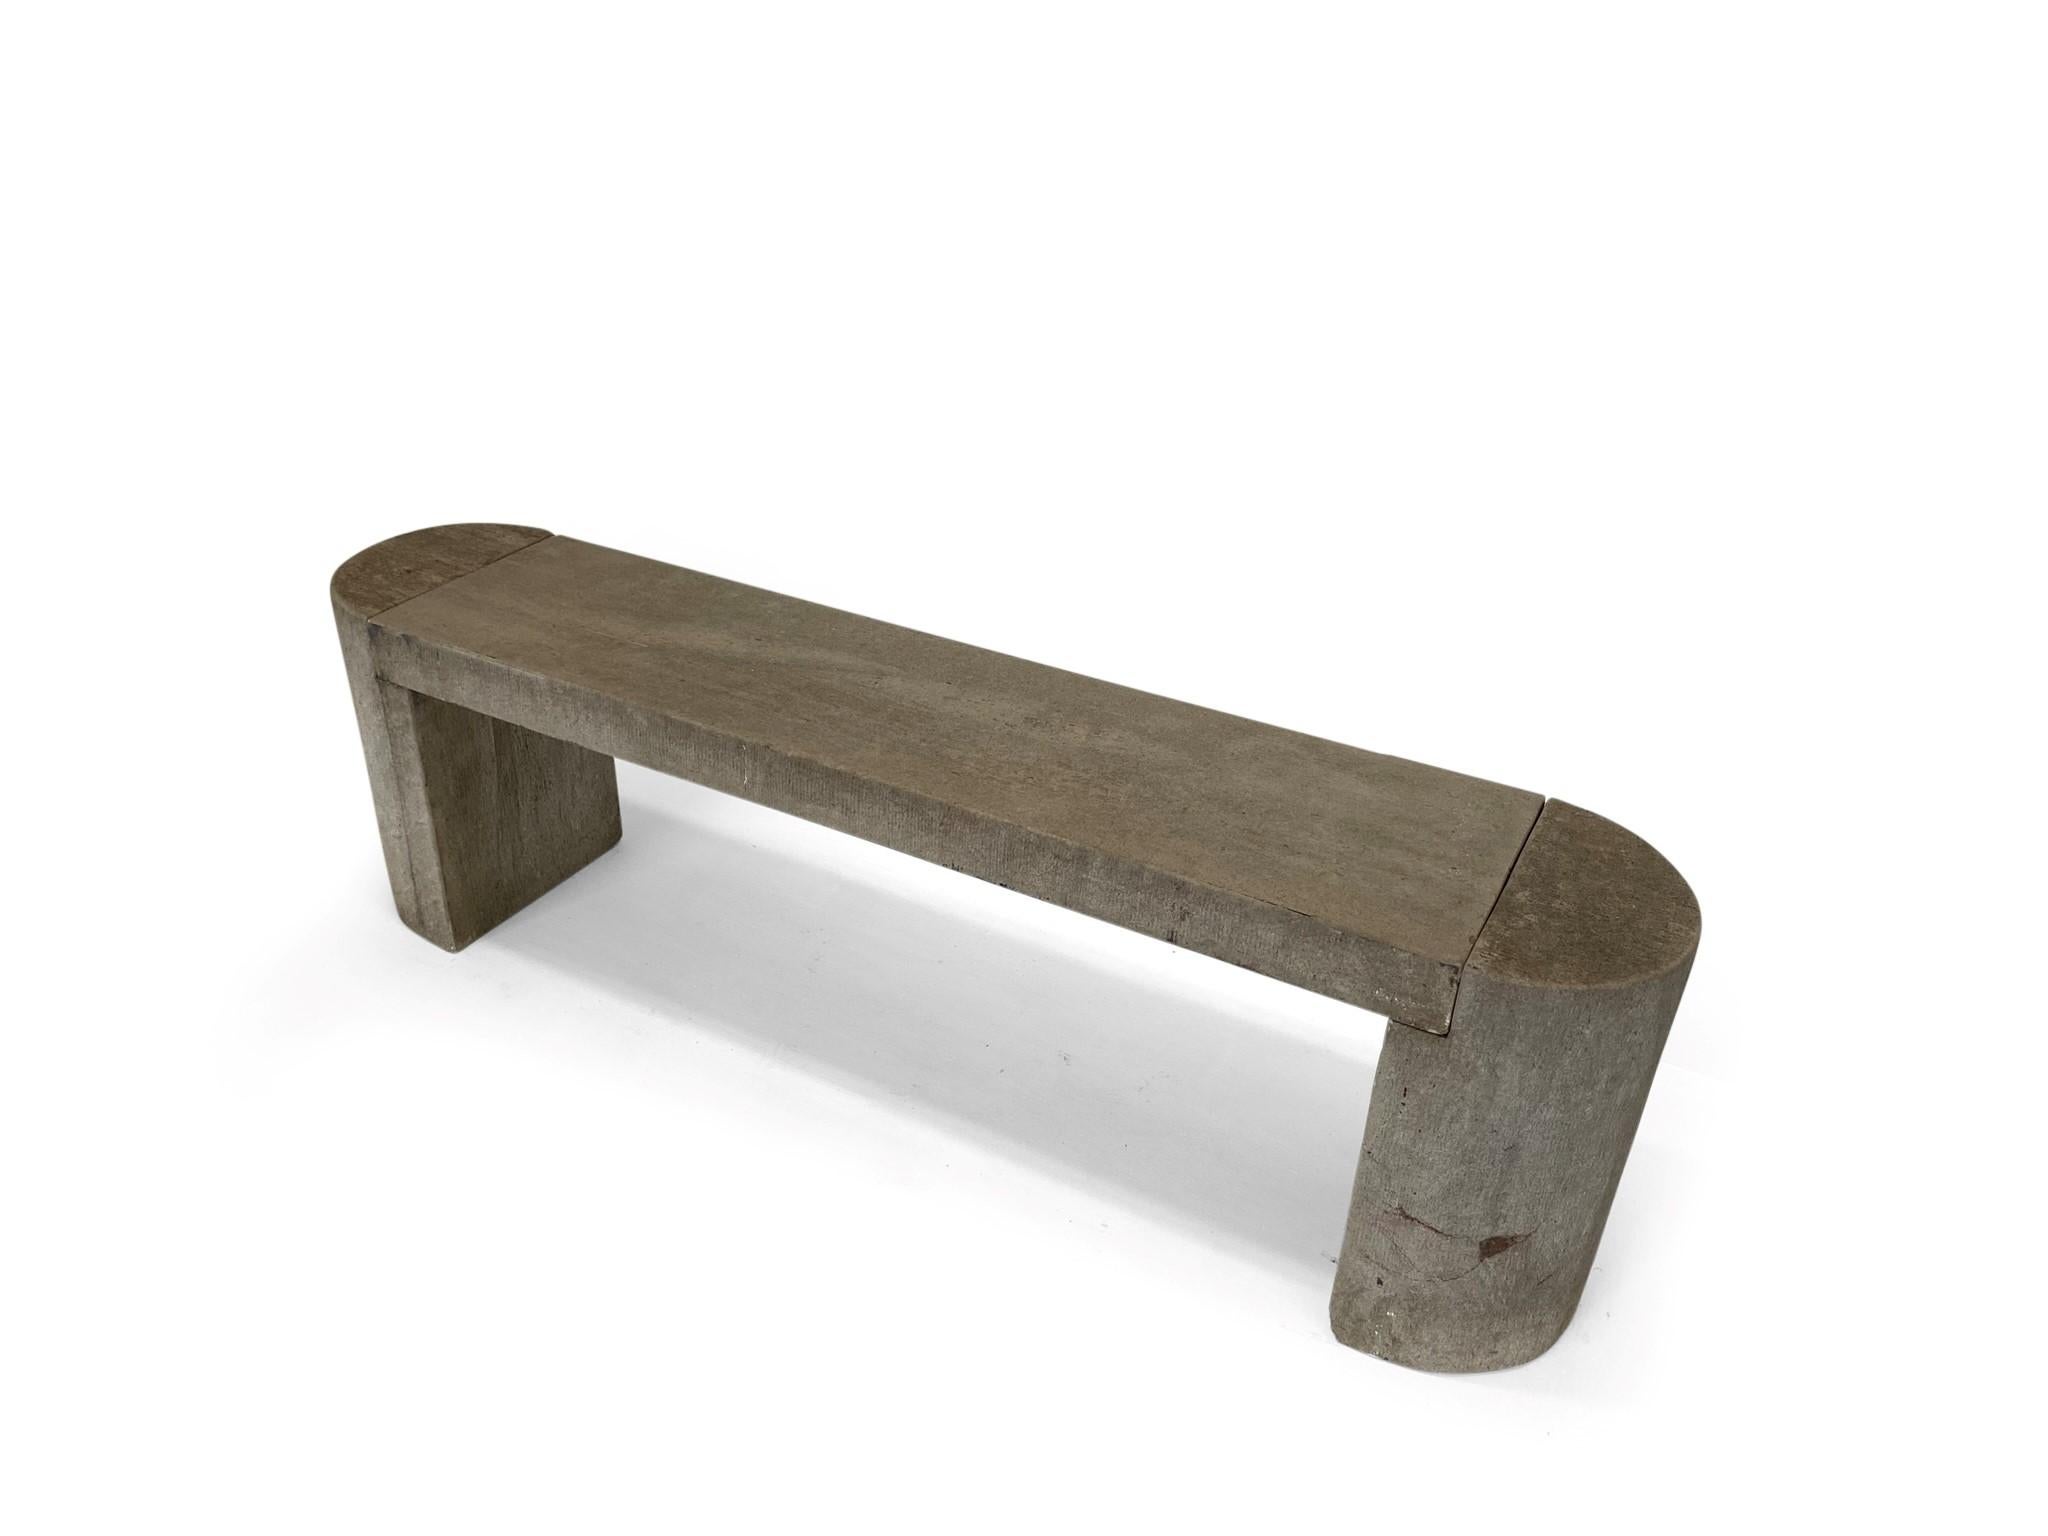 Modernist Polished Stone Concrete Bench Seat with Aged Patina For Sale 8